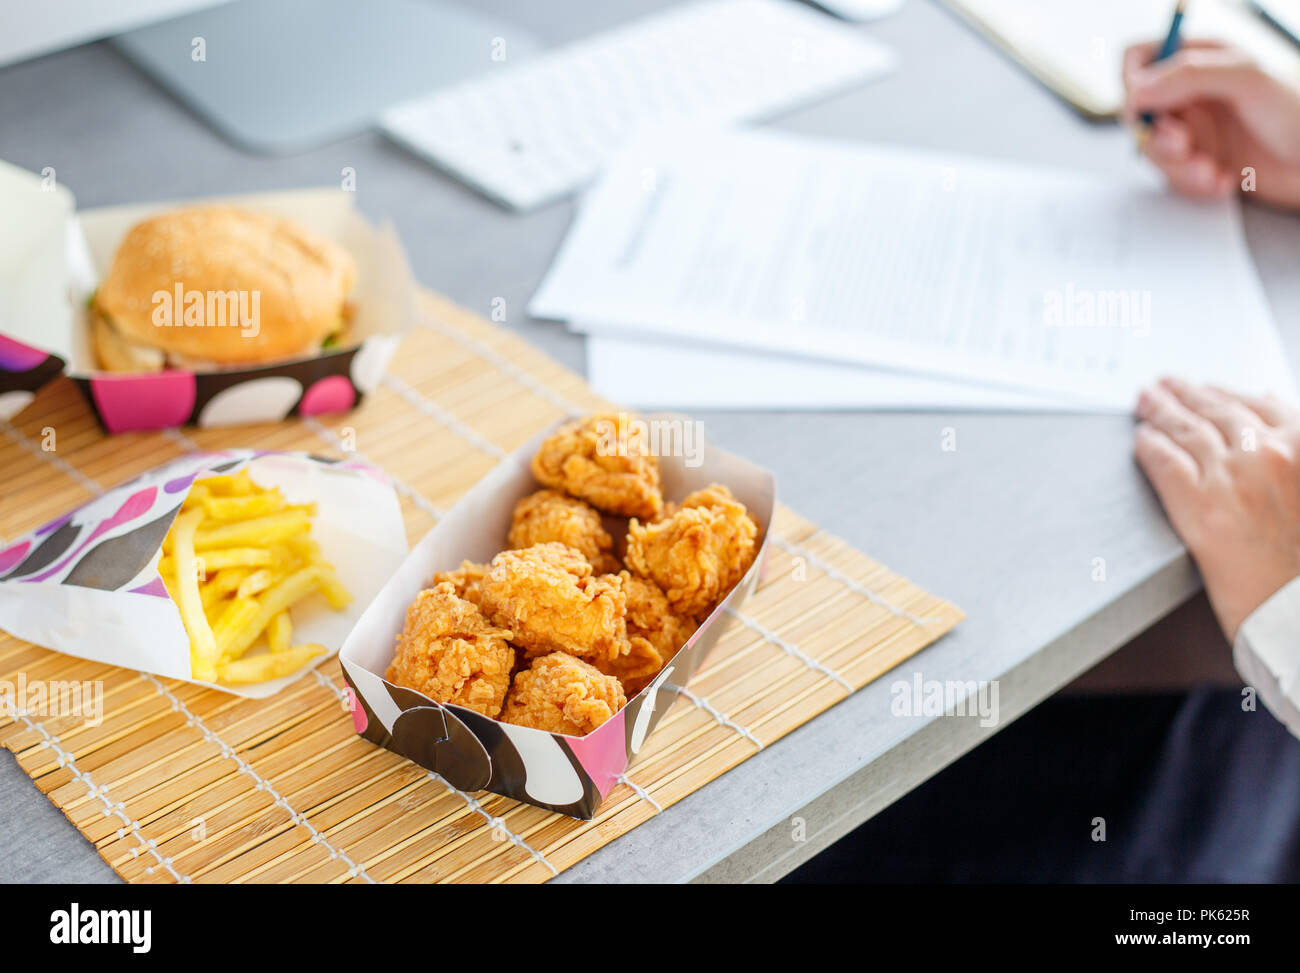 lunch time at the work place. Fast food delivery concept image Stock Photo